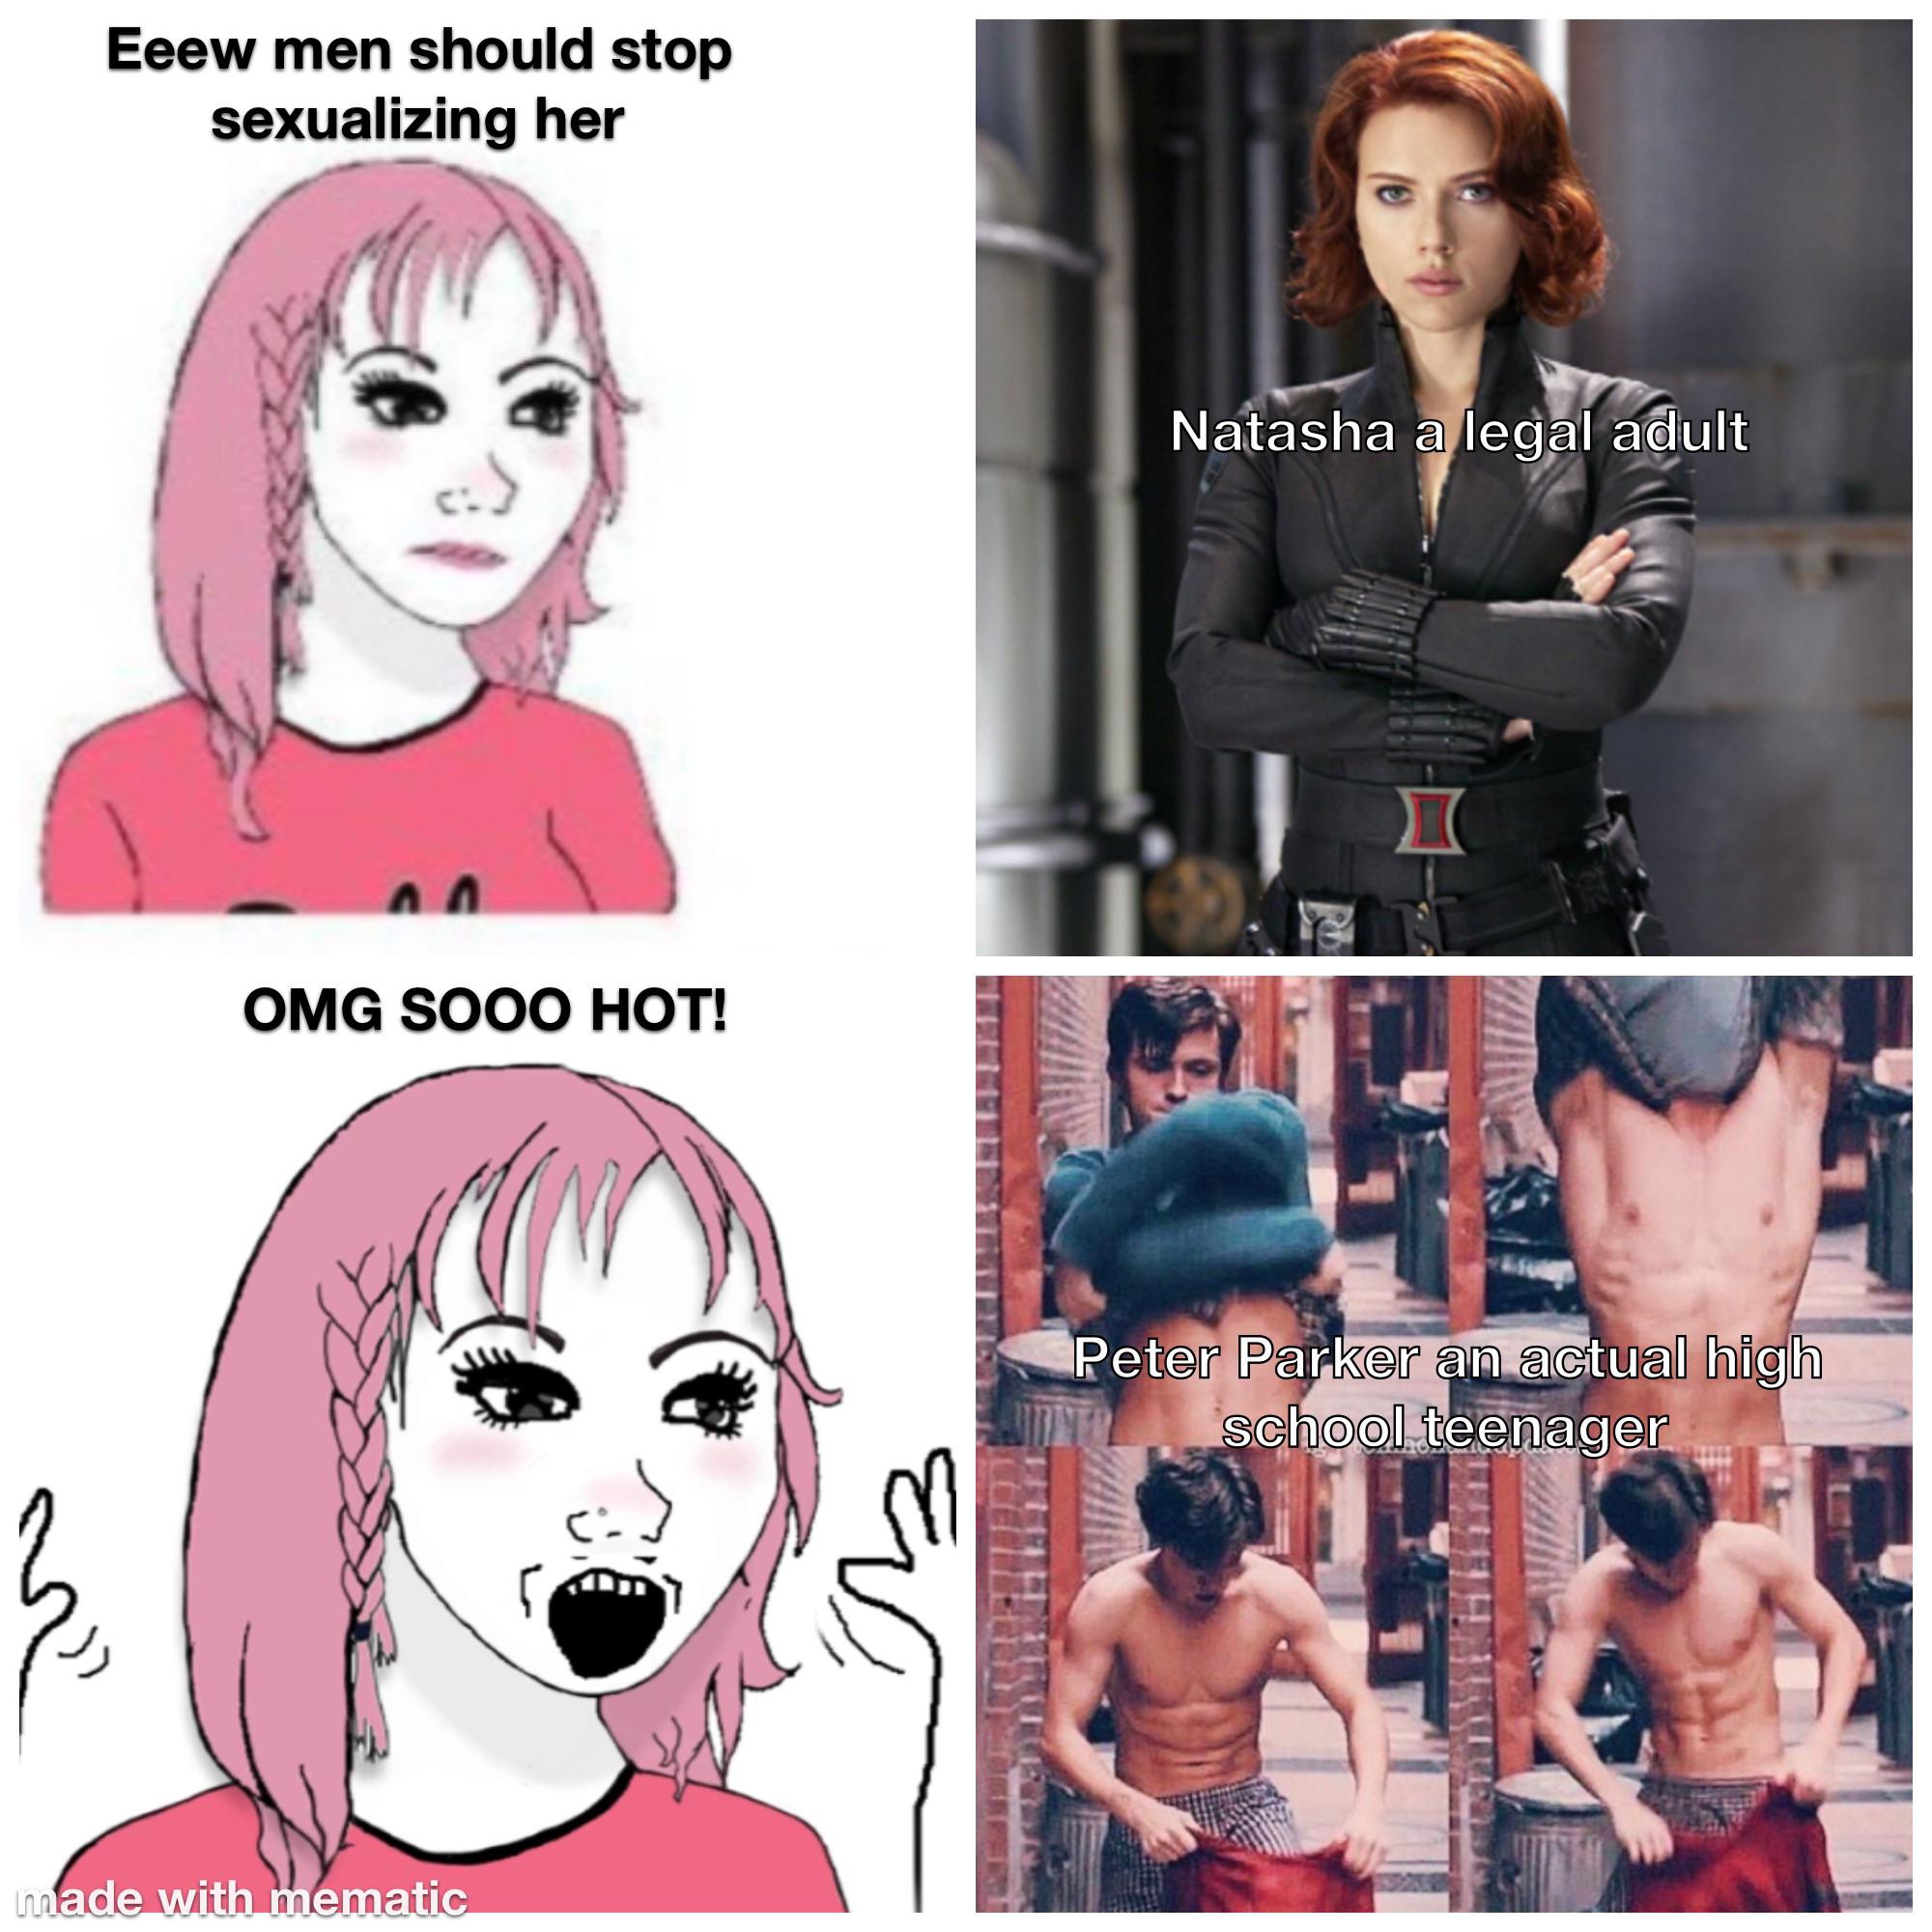 facial expression - Eeew men should stop sexualizing her Natasha a legal adult Omg Sooo Hot! Peter Parker an actual high school teenager made with mematic